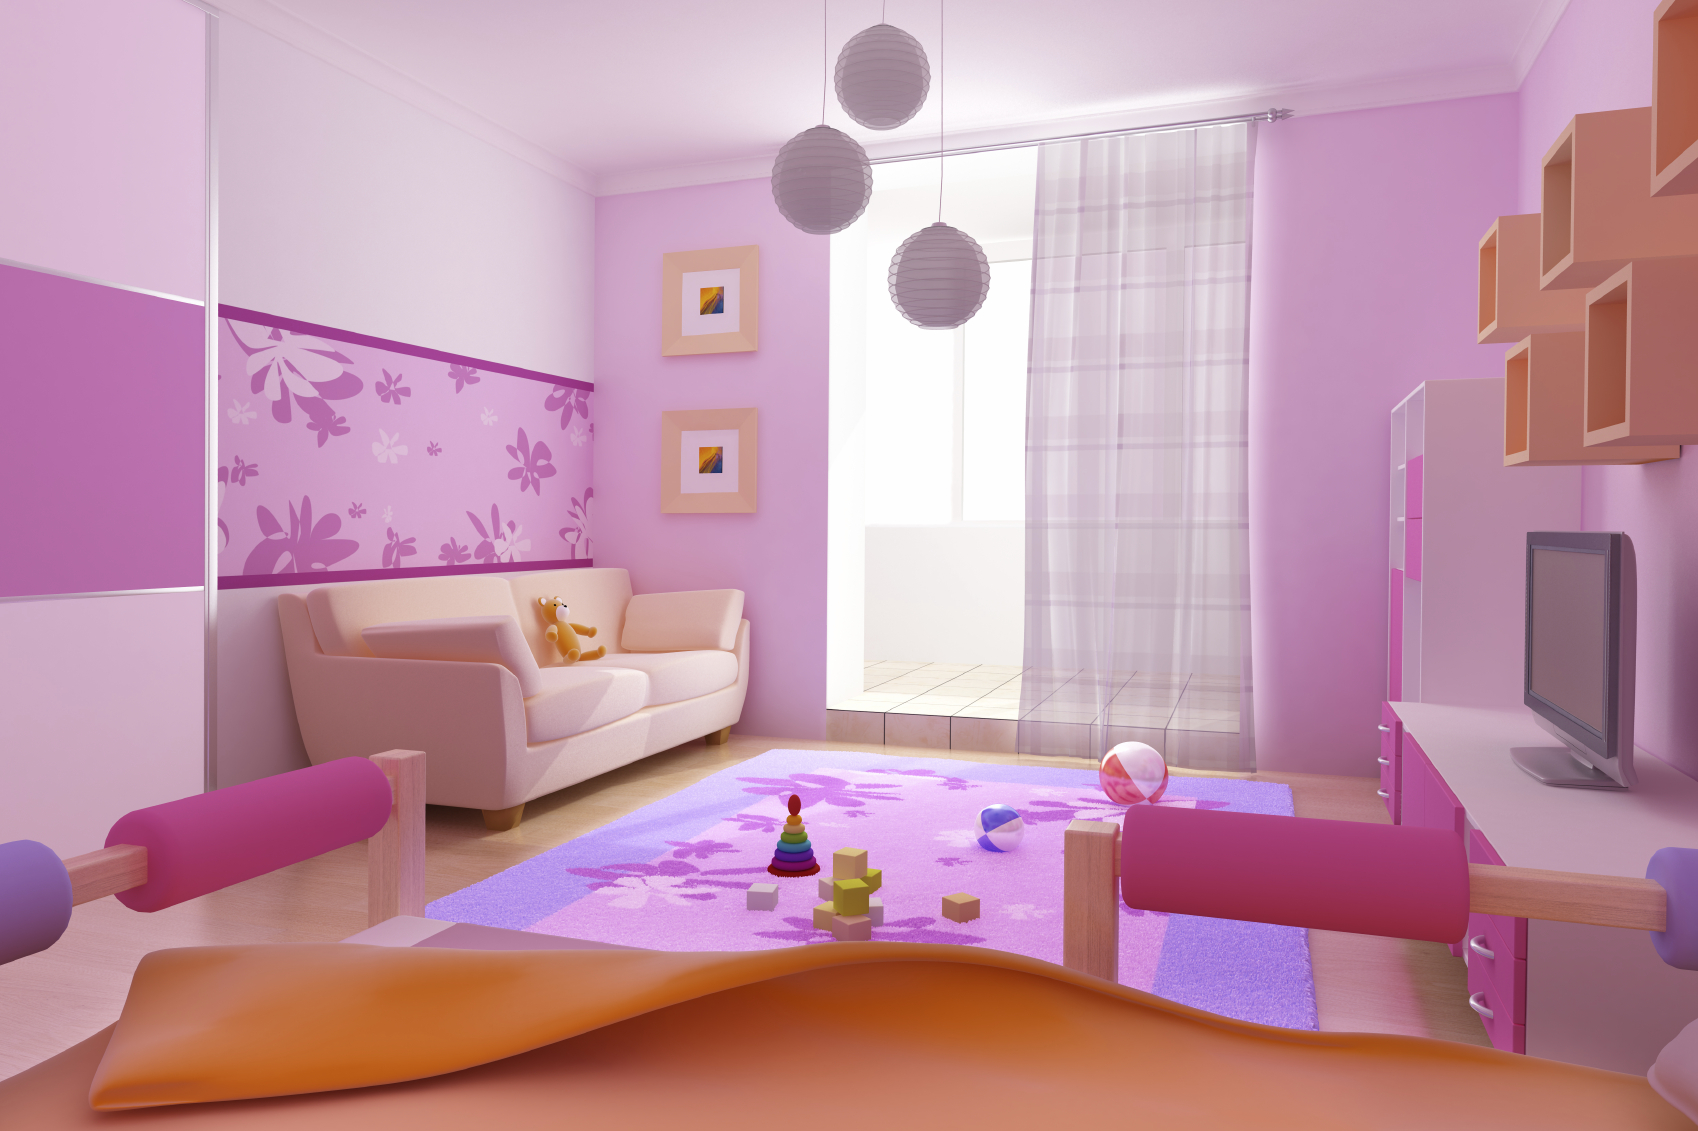 Design of wallpaper in warm colors for a child’s room for an active and modern boy